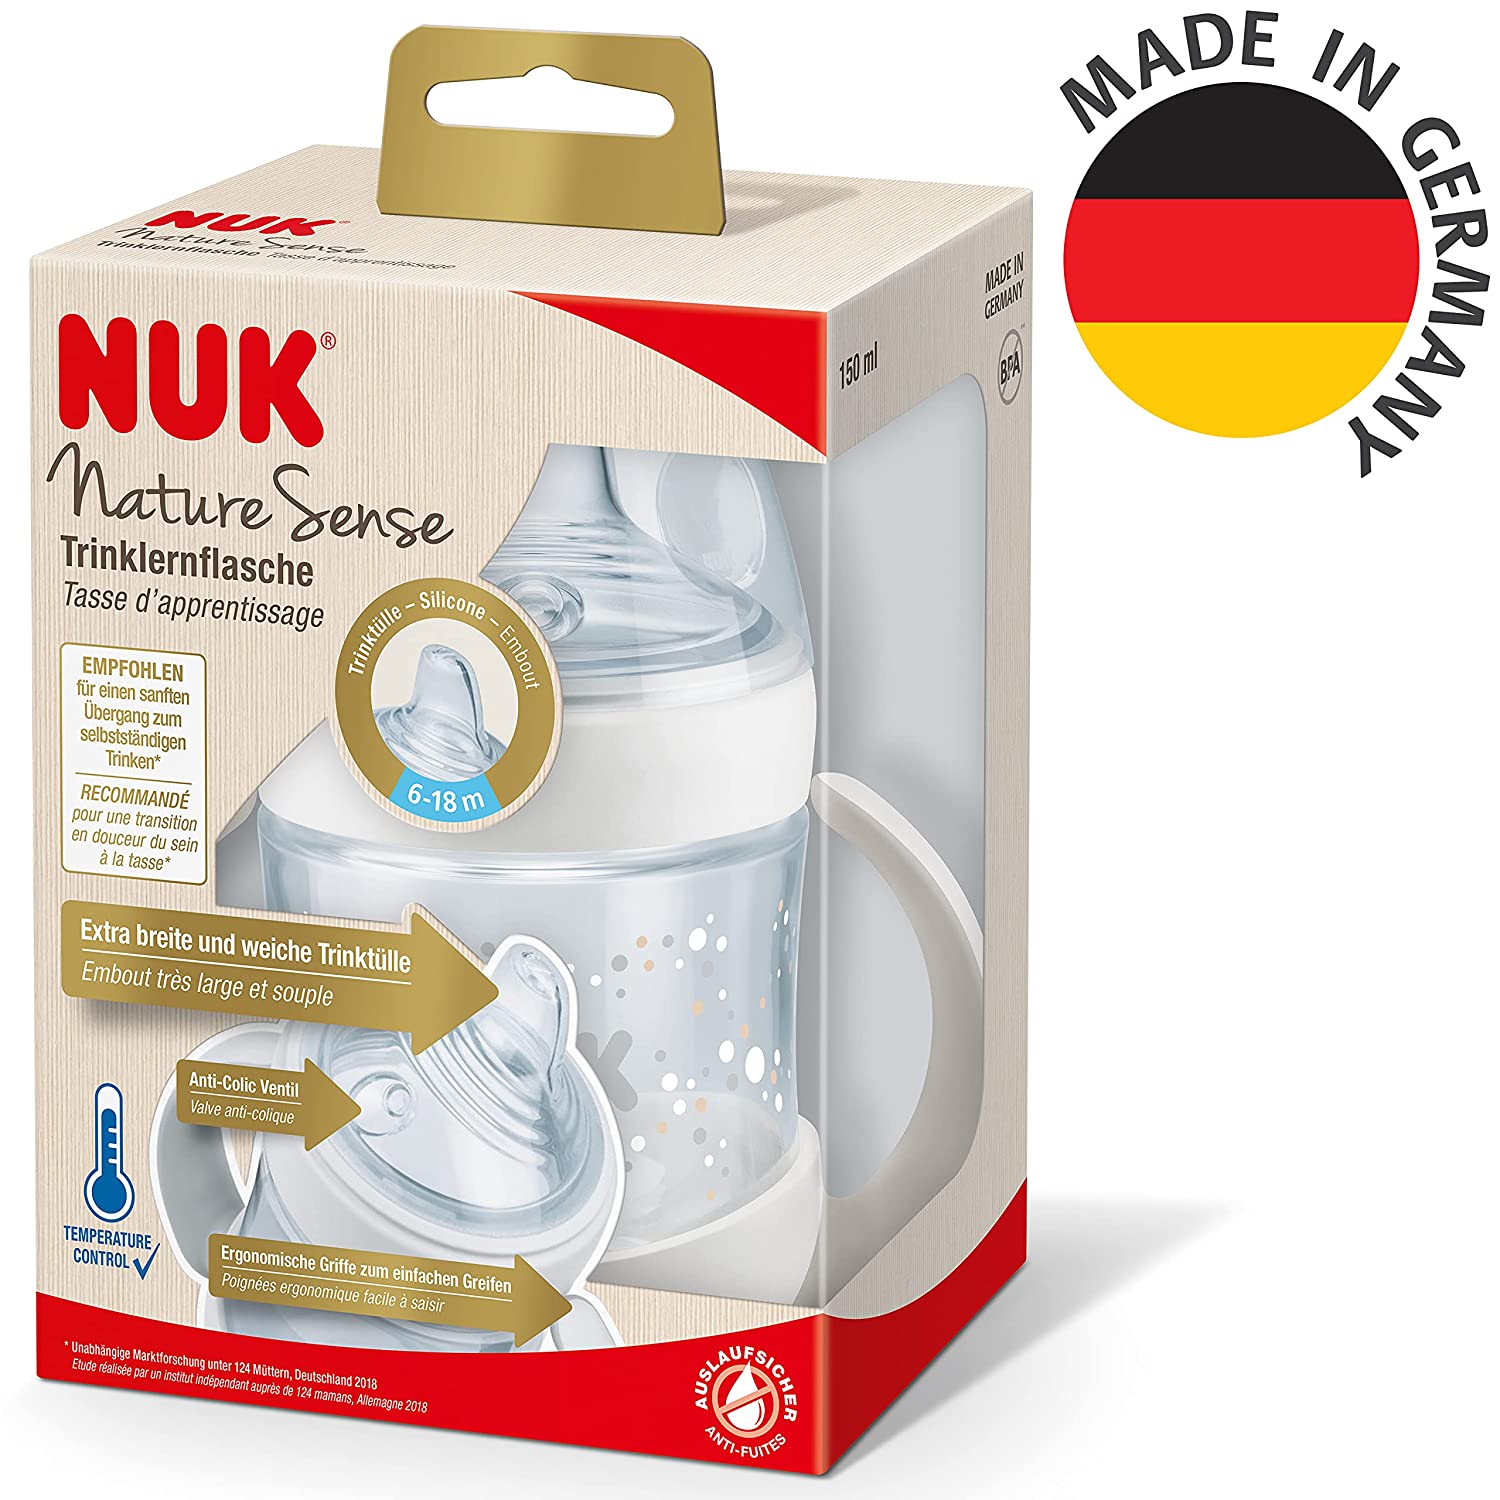 NUK Nature Sense Training Bottle | 6-18 Months | 150 ml | Temperature Control Display | With Ergonomic Handles and Anti-Colic Valve | Leak-proof Silicone Spout | BPA Free | White